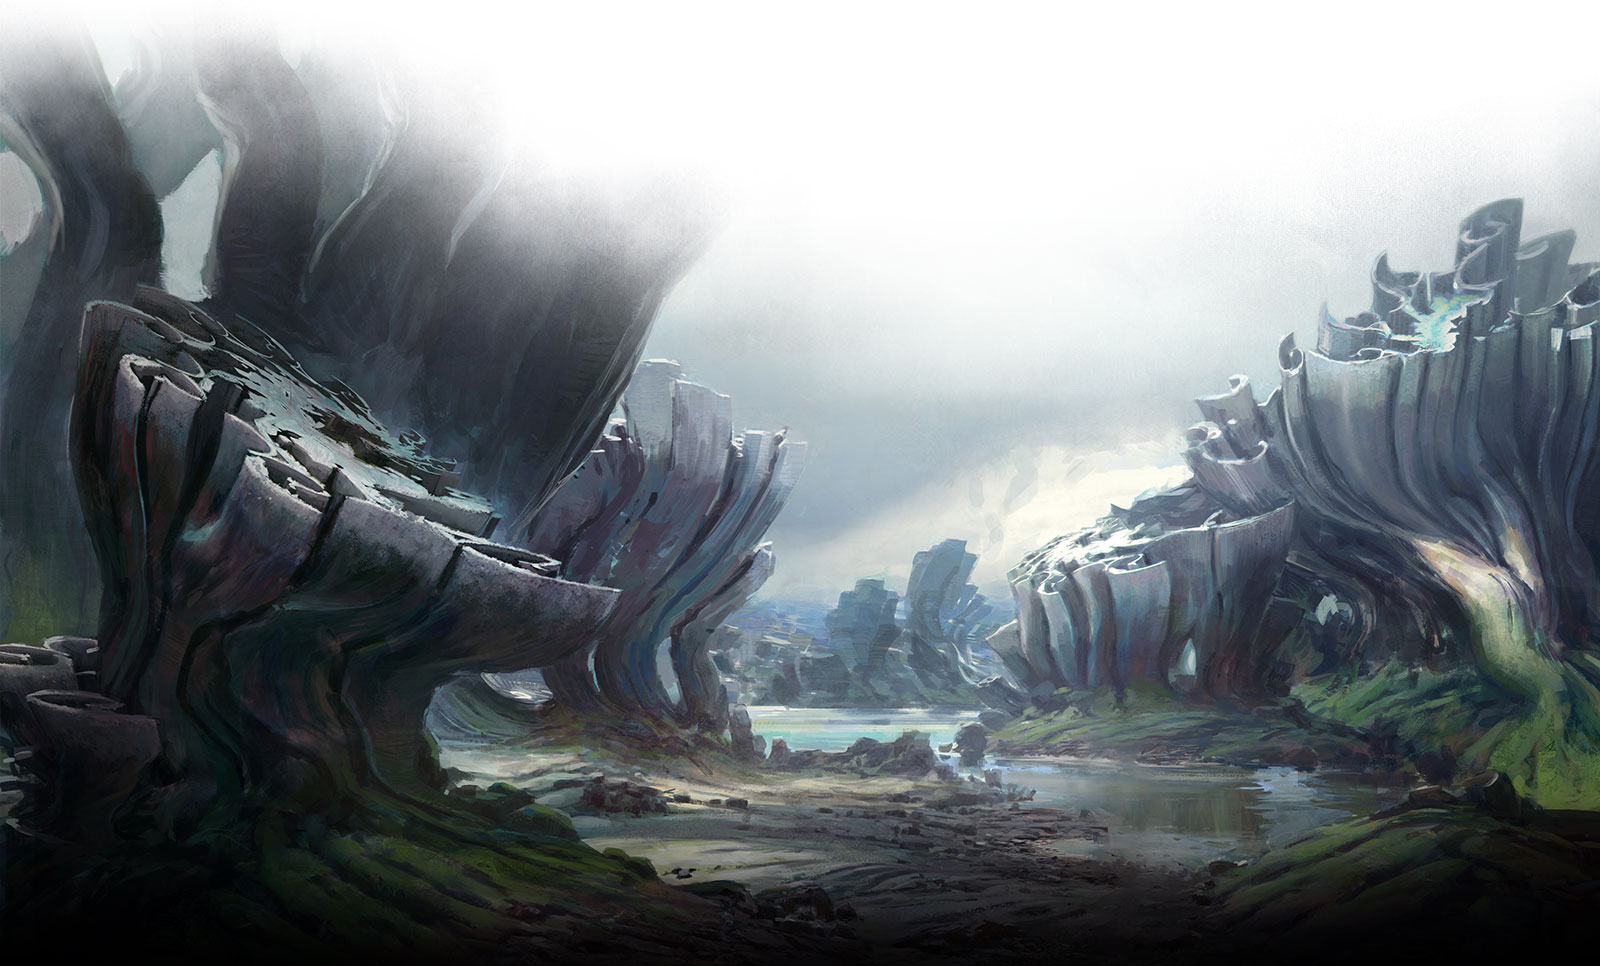 Halo 5 Guardians concept art: Master Chief walking among coral-like structures in alien landscape